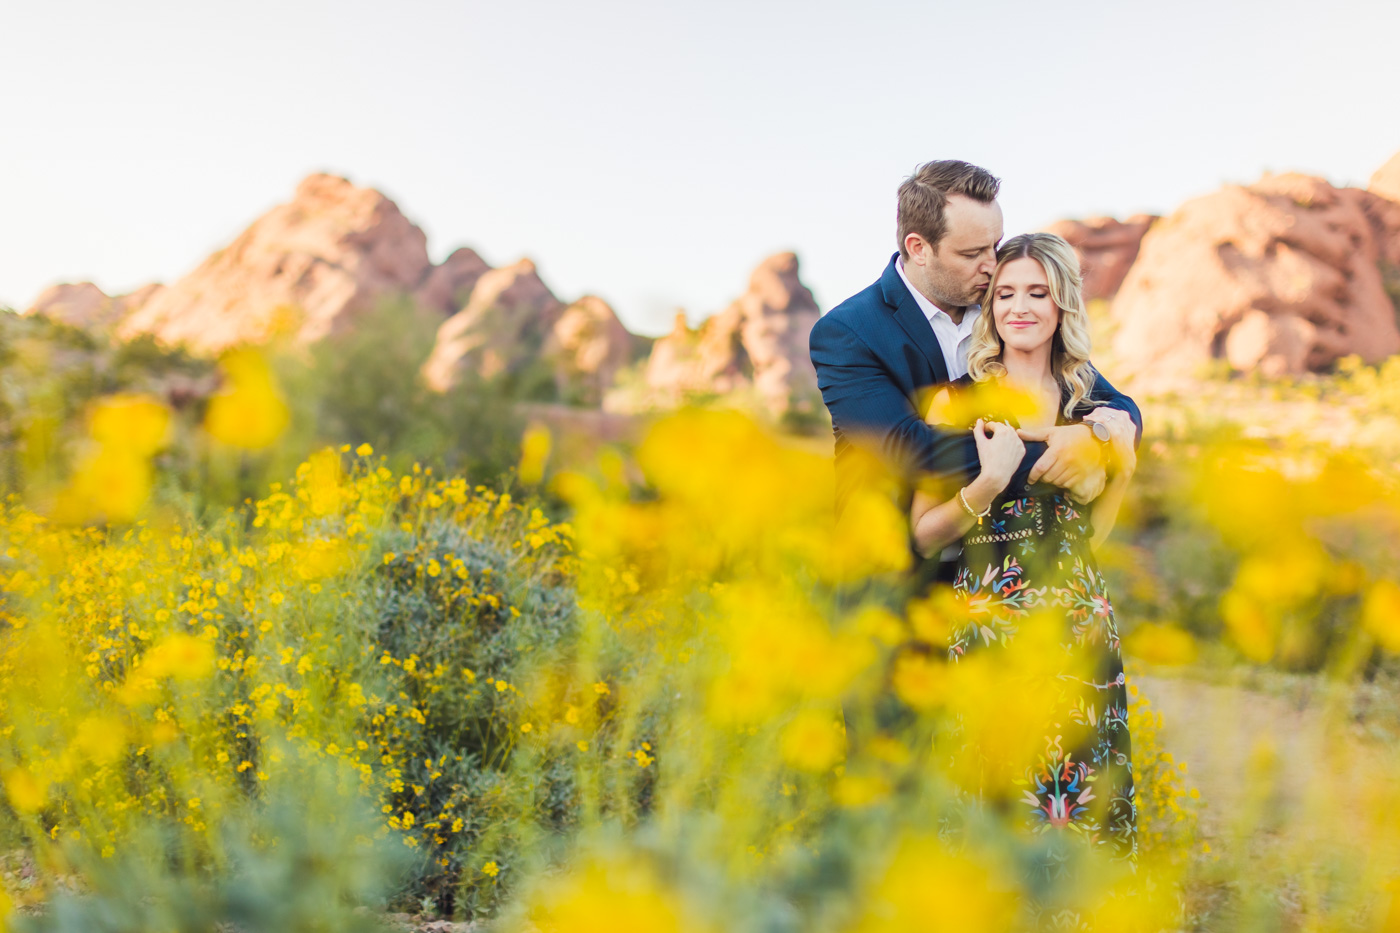 aaron-kes-photography-papago-park-engagement-session-7.jpg